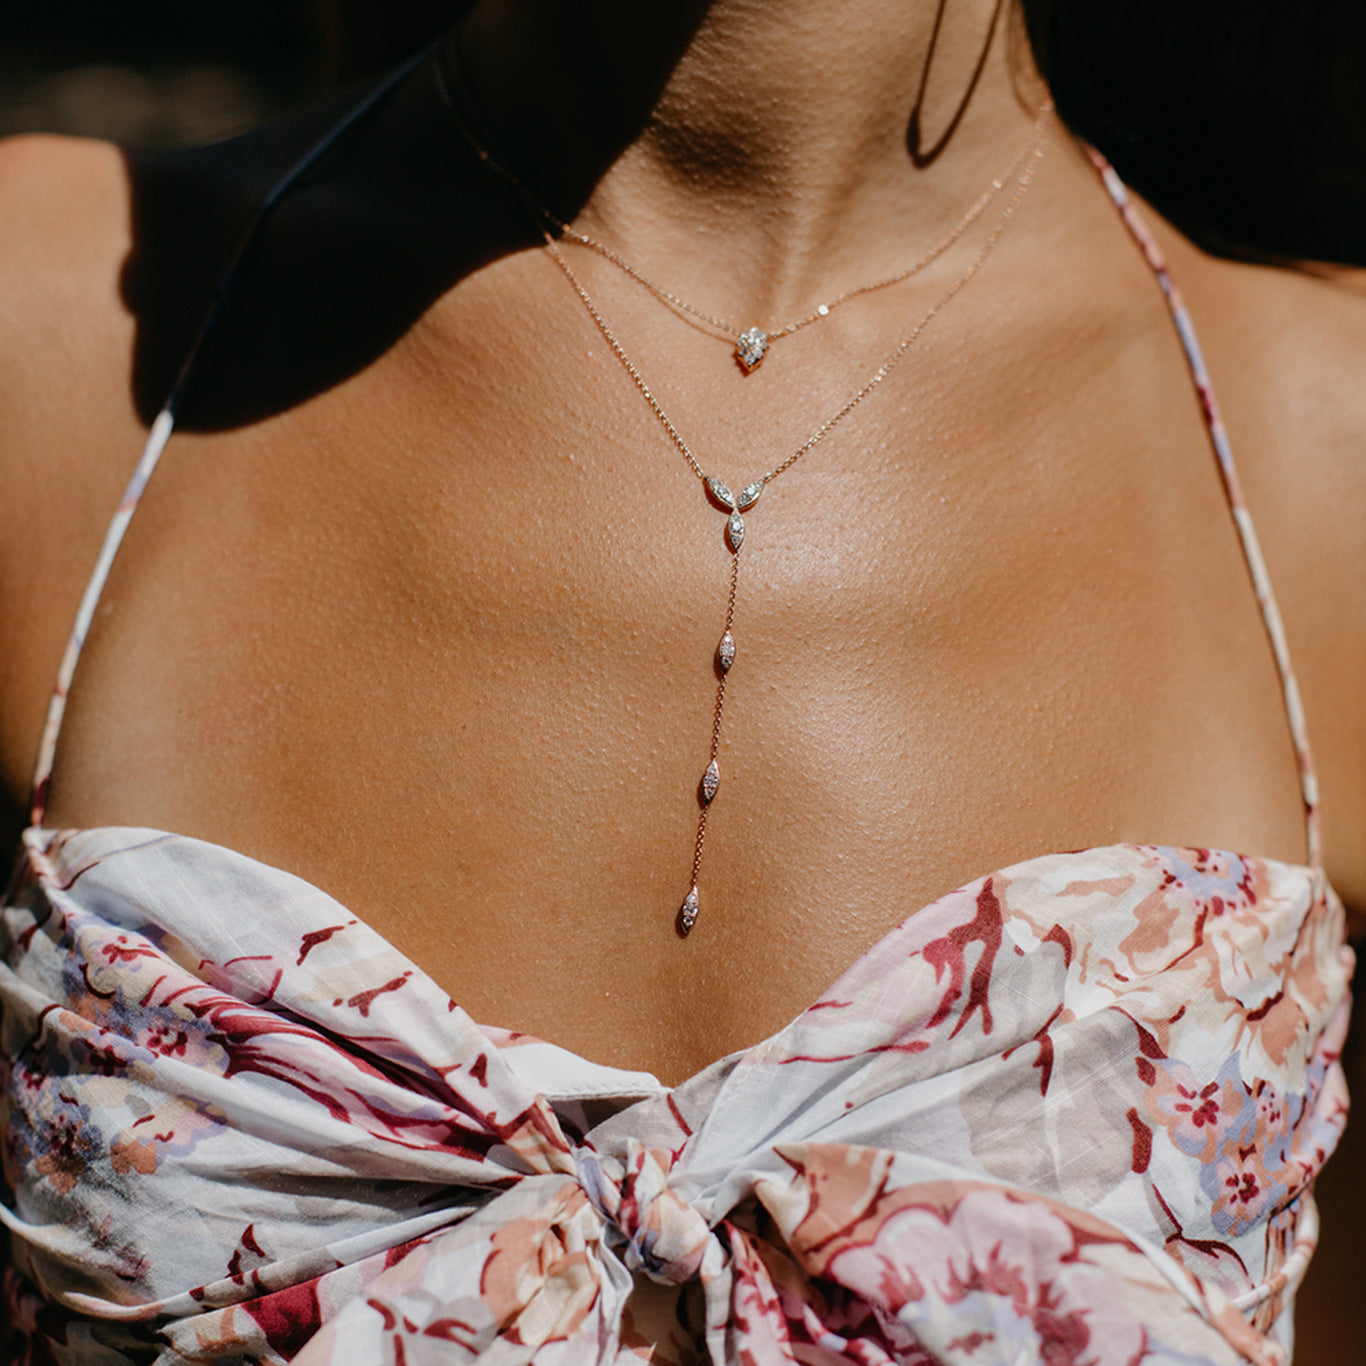 The Venus Choker Chain shown beautifully layered with the Cascade Lariat.